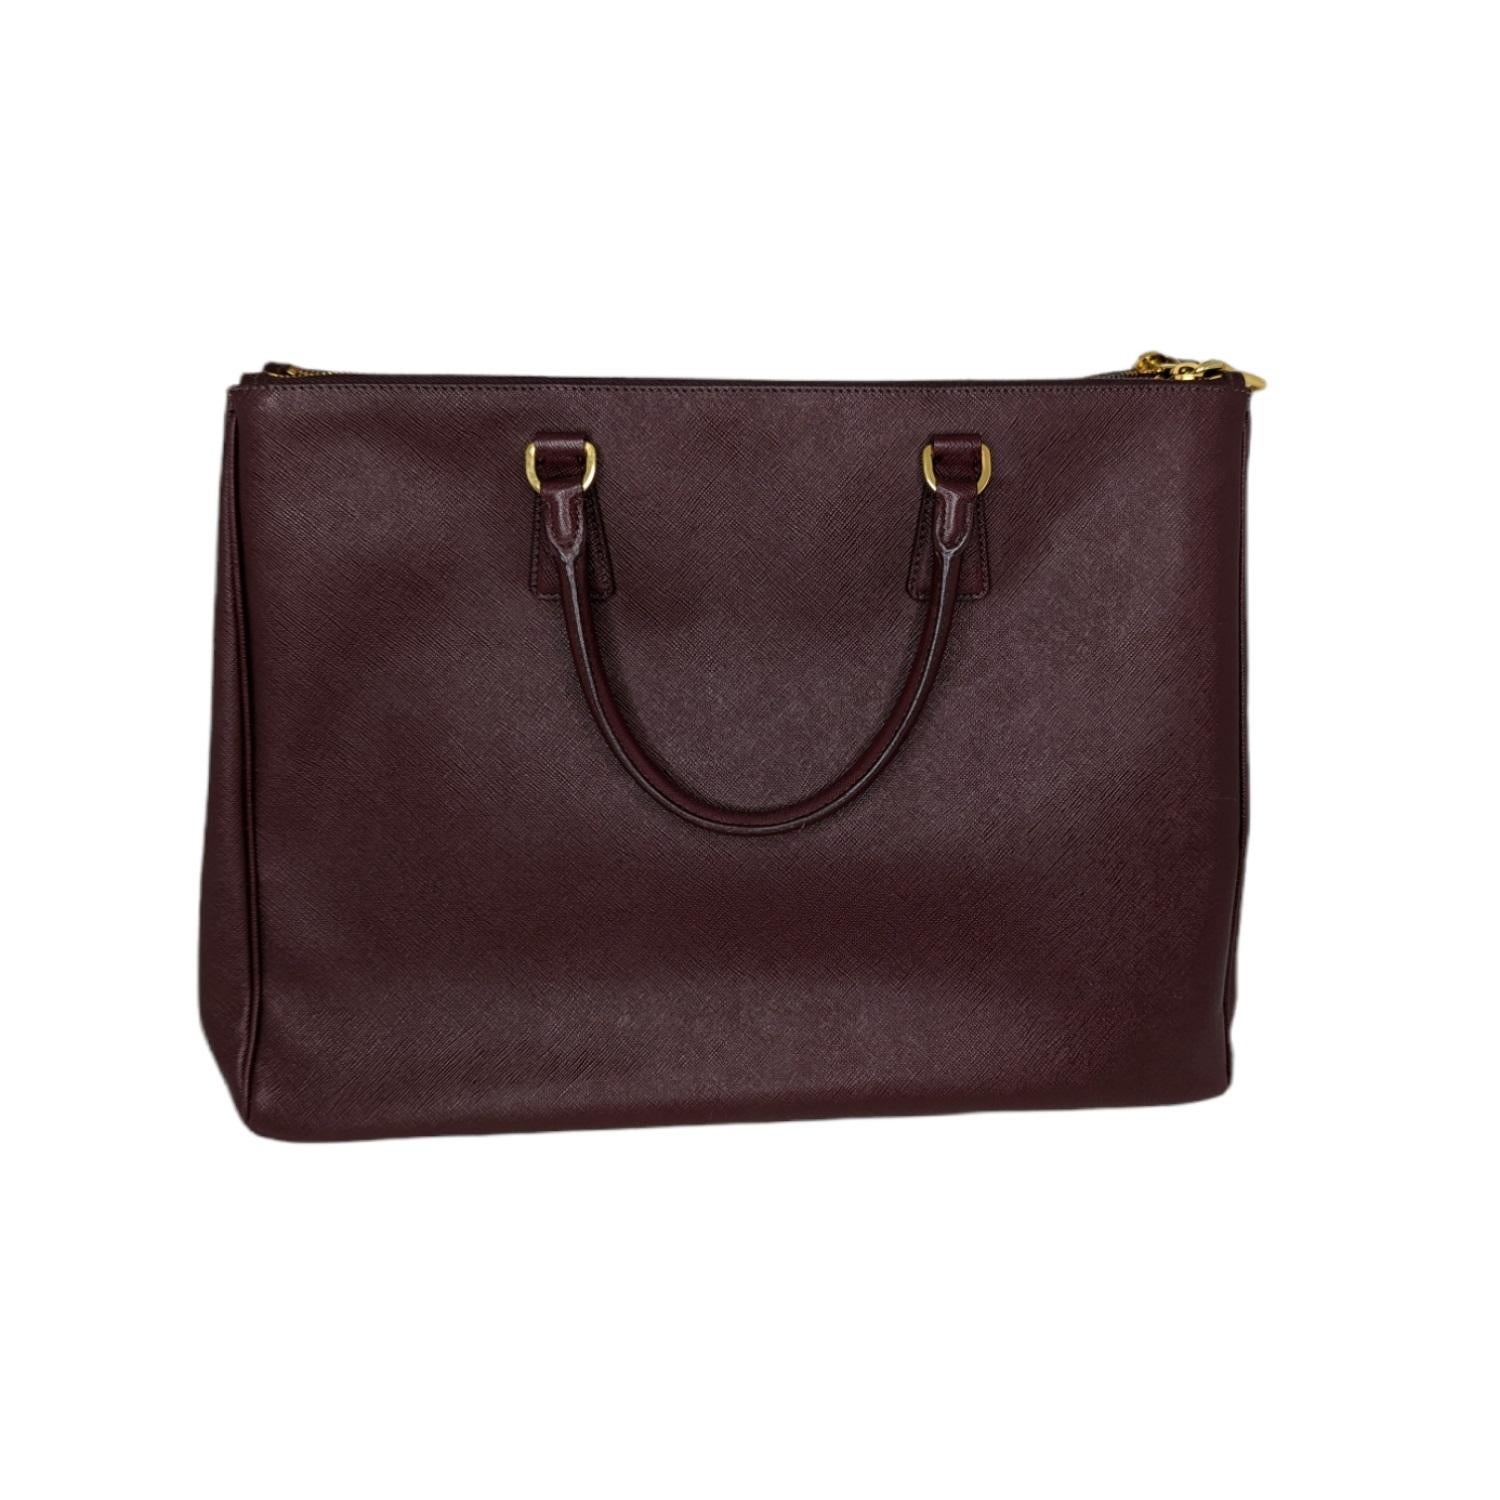 This chic tote is crafted of Prada signature Saffiano cross-grain leather in wine. The tote features rolled leather top handles and polished gold links. The top is open to a wine fabric interior with two full length zippered pockets, a zipper pocket